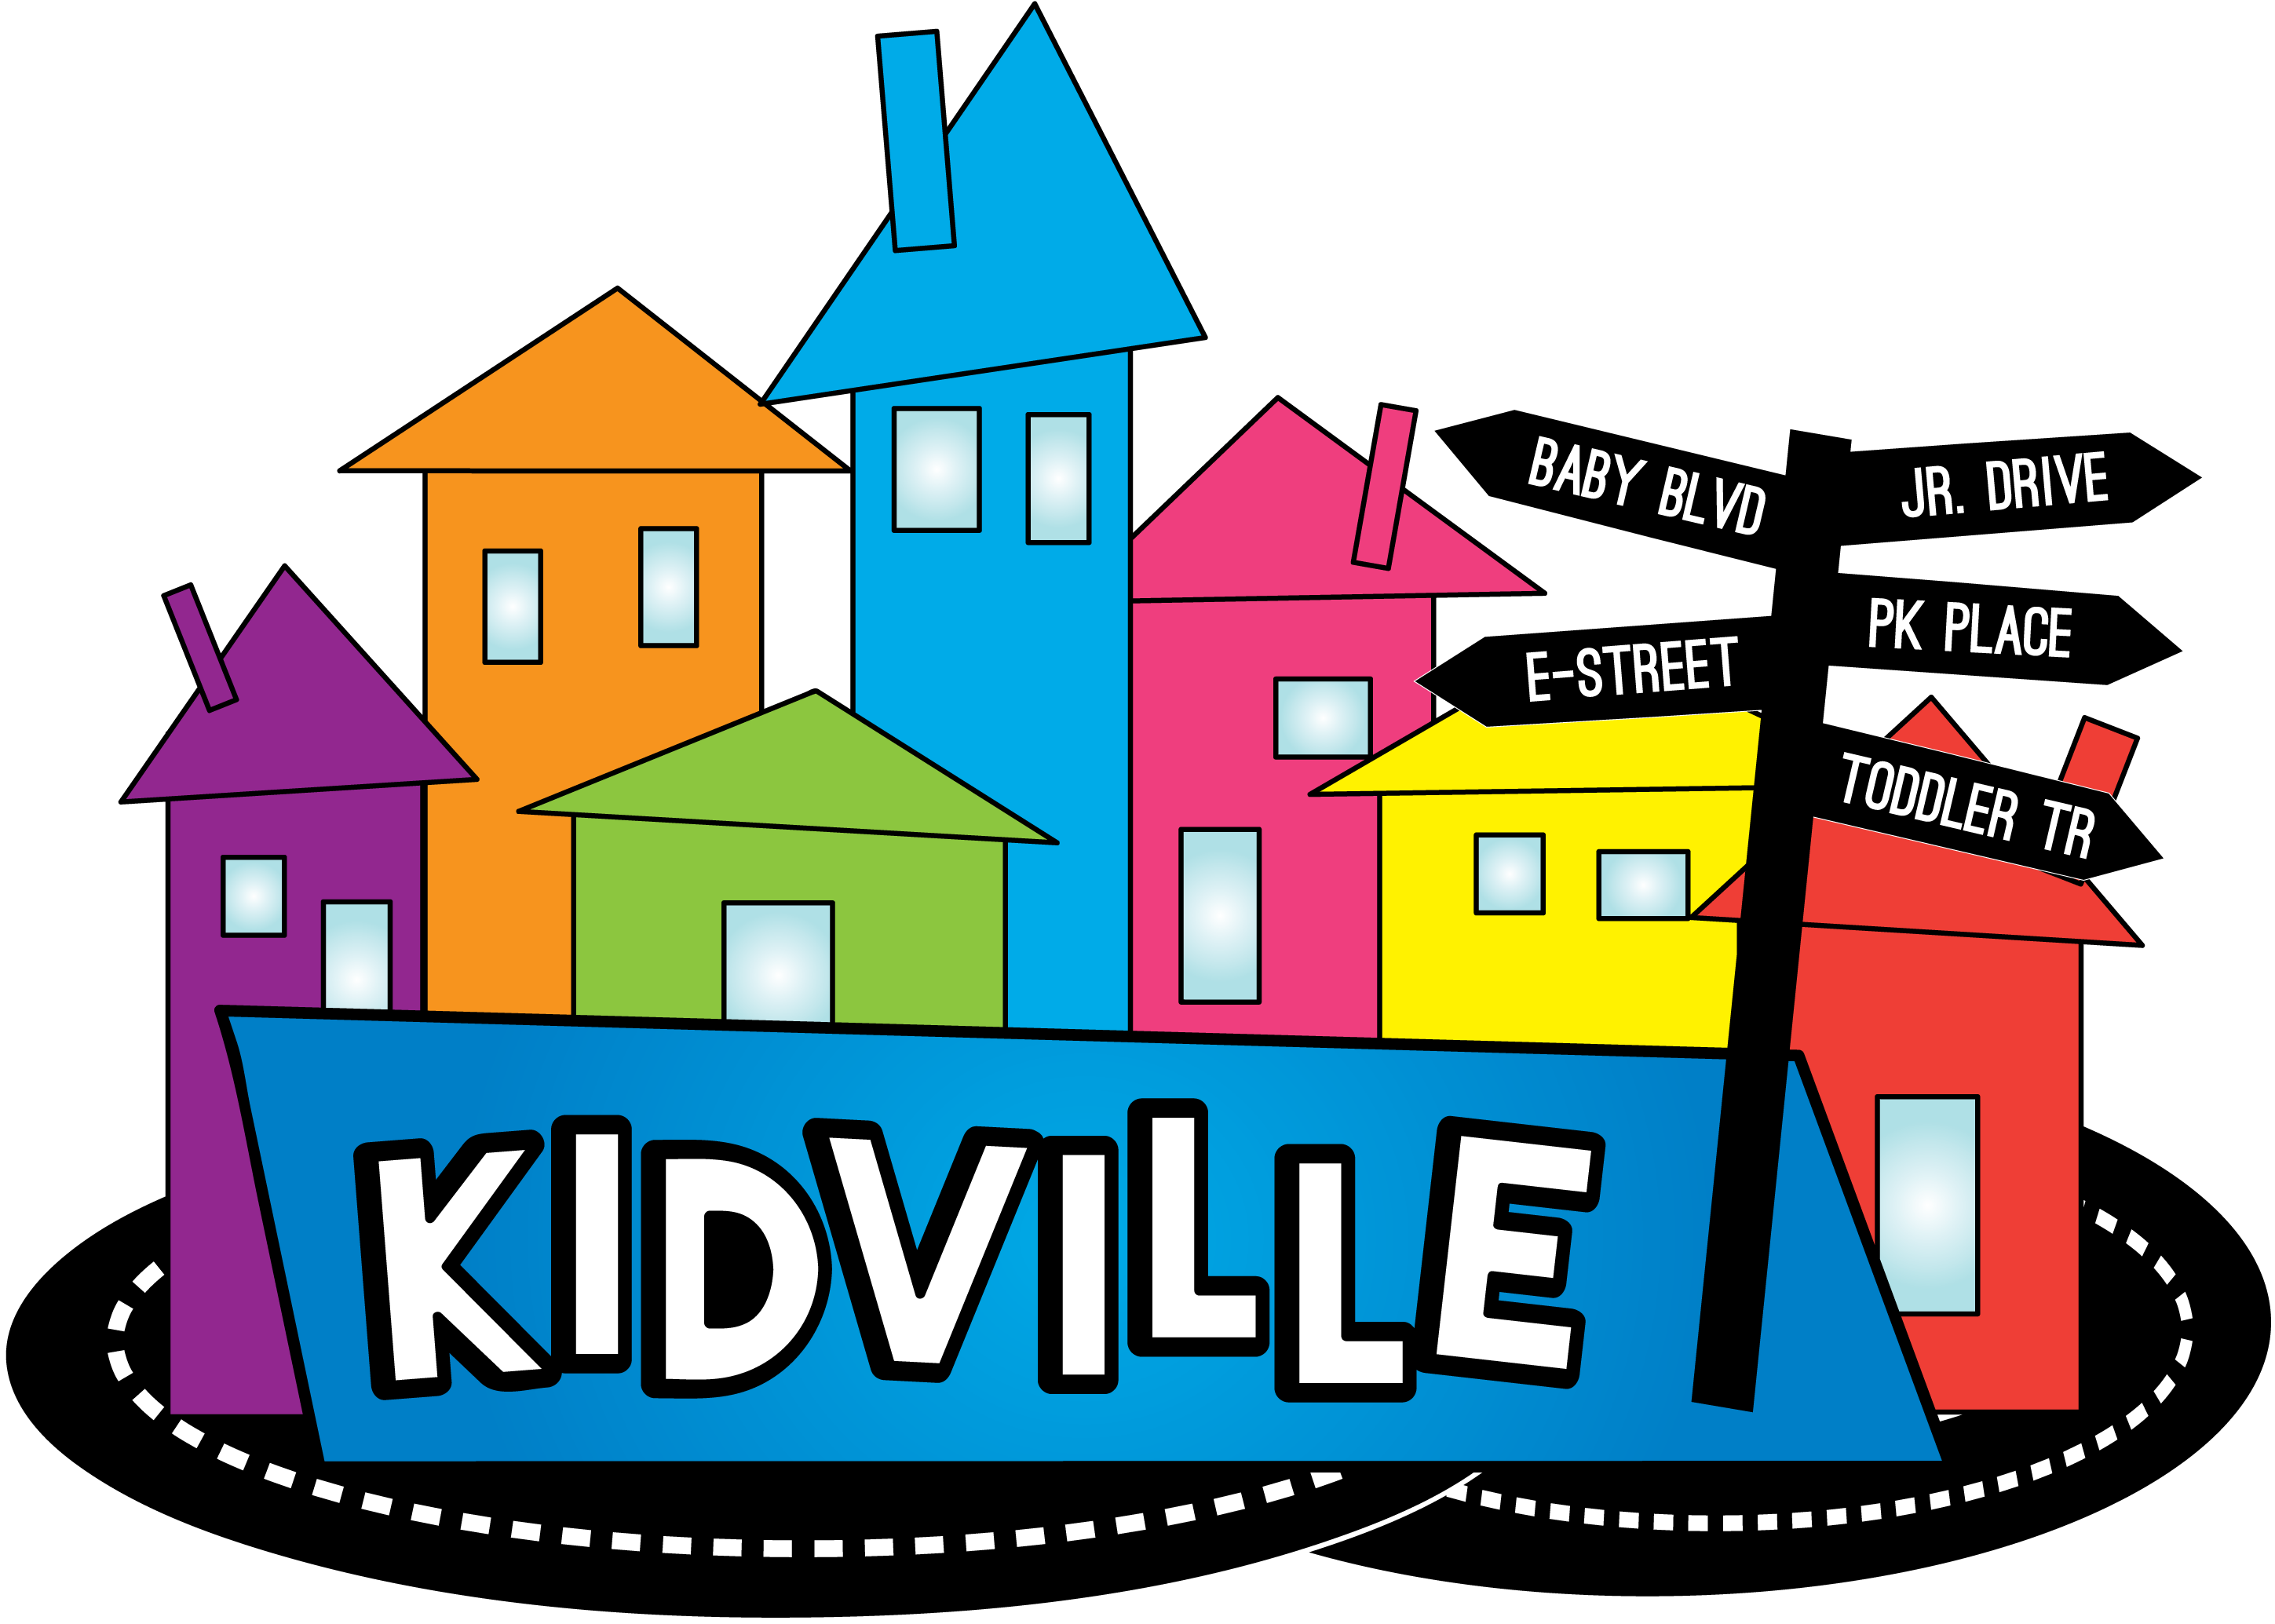 Welcome To Kidville - Church (3033x2225)